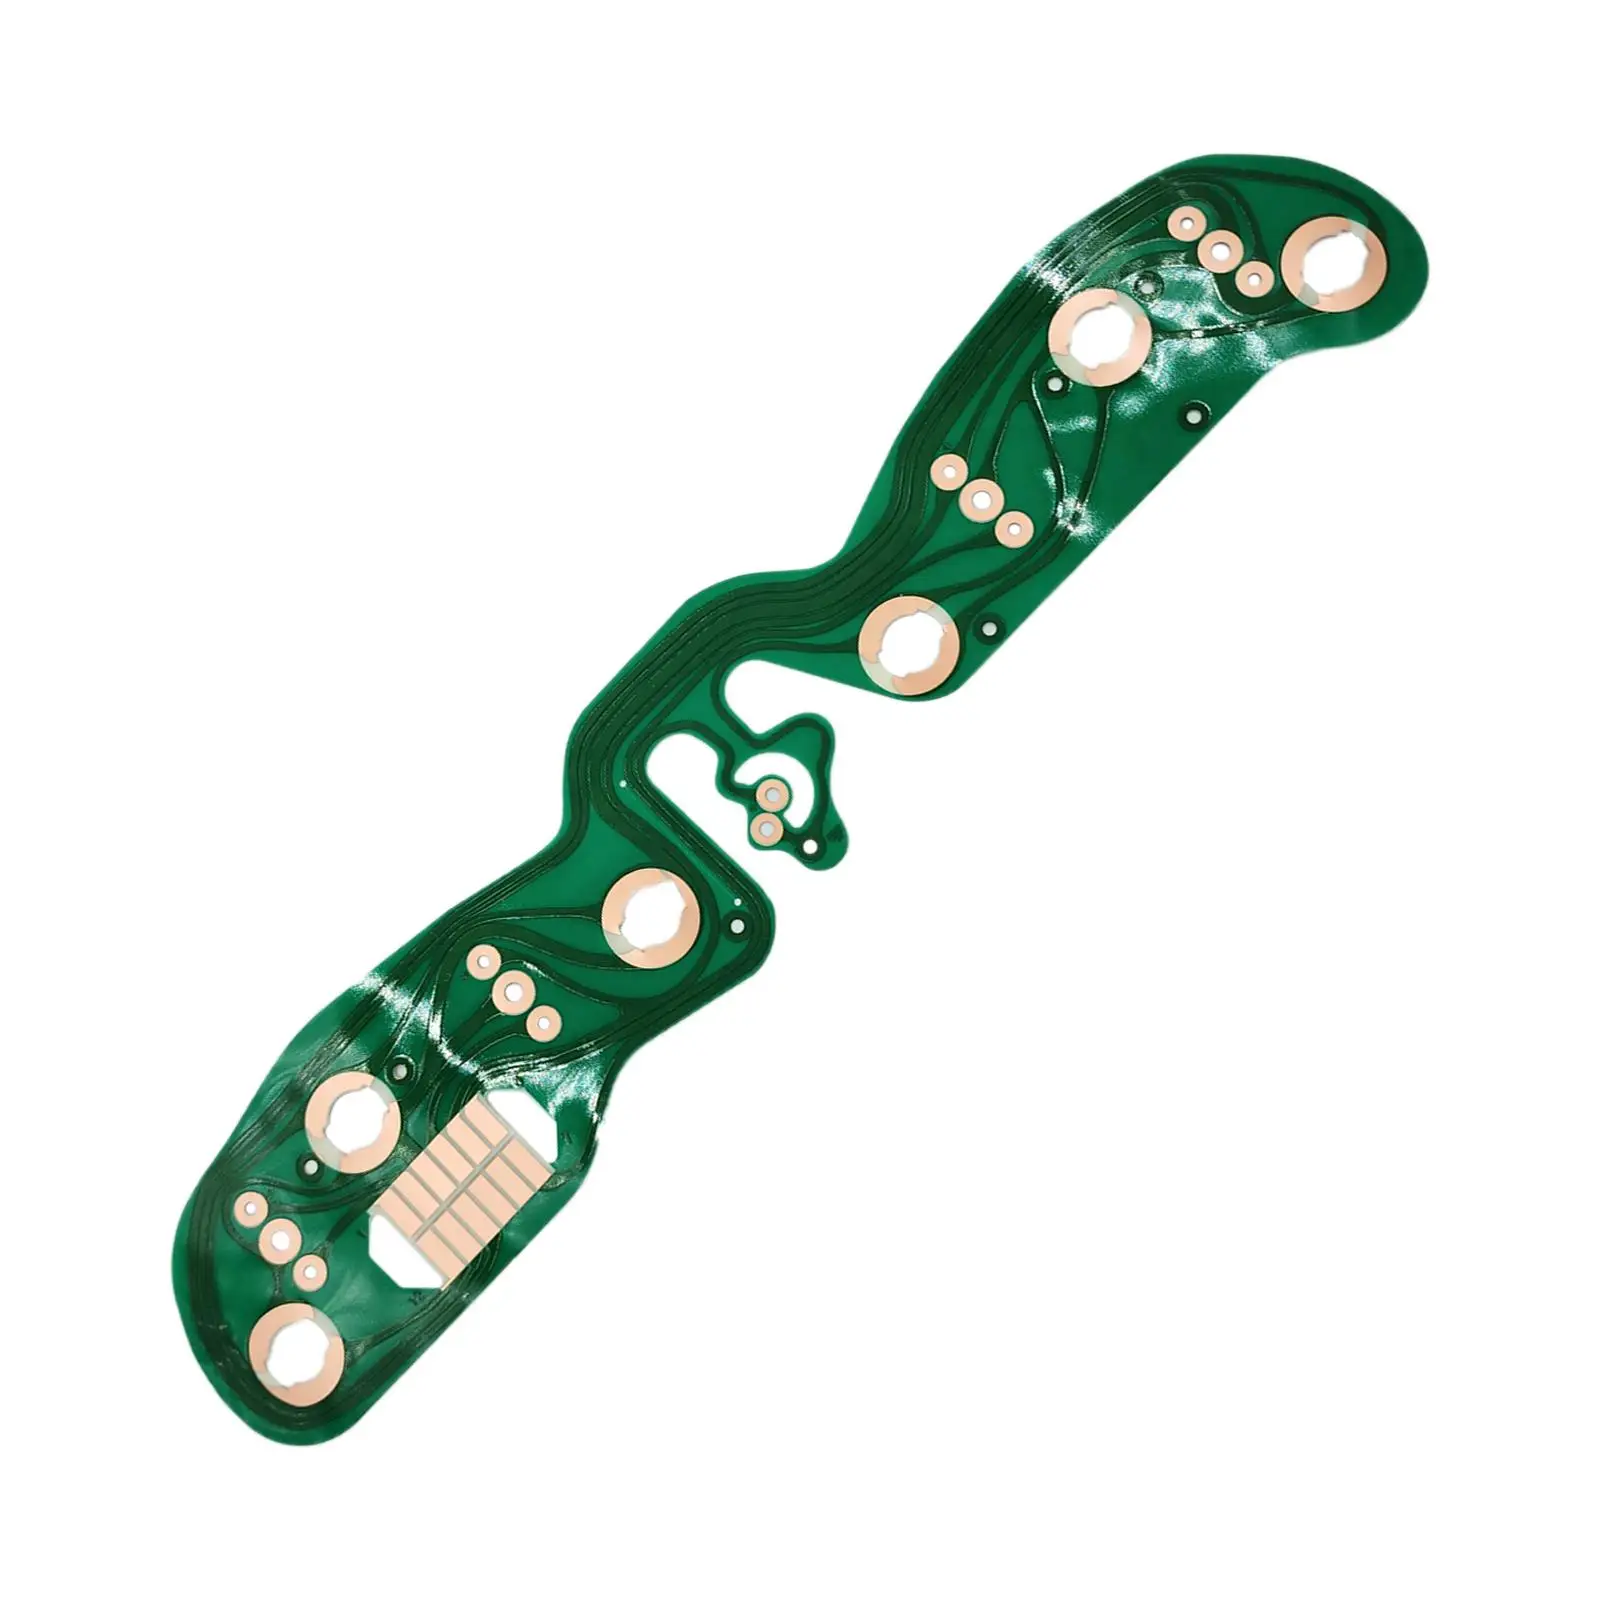 Gauges Printed Circuit Board for Jeep Wrangler Electronic Circuit Board